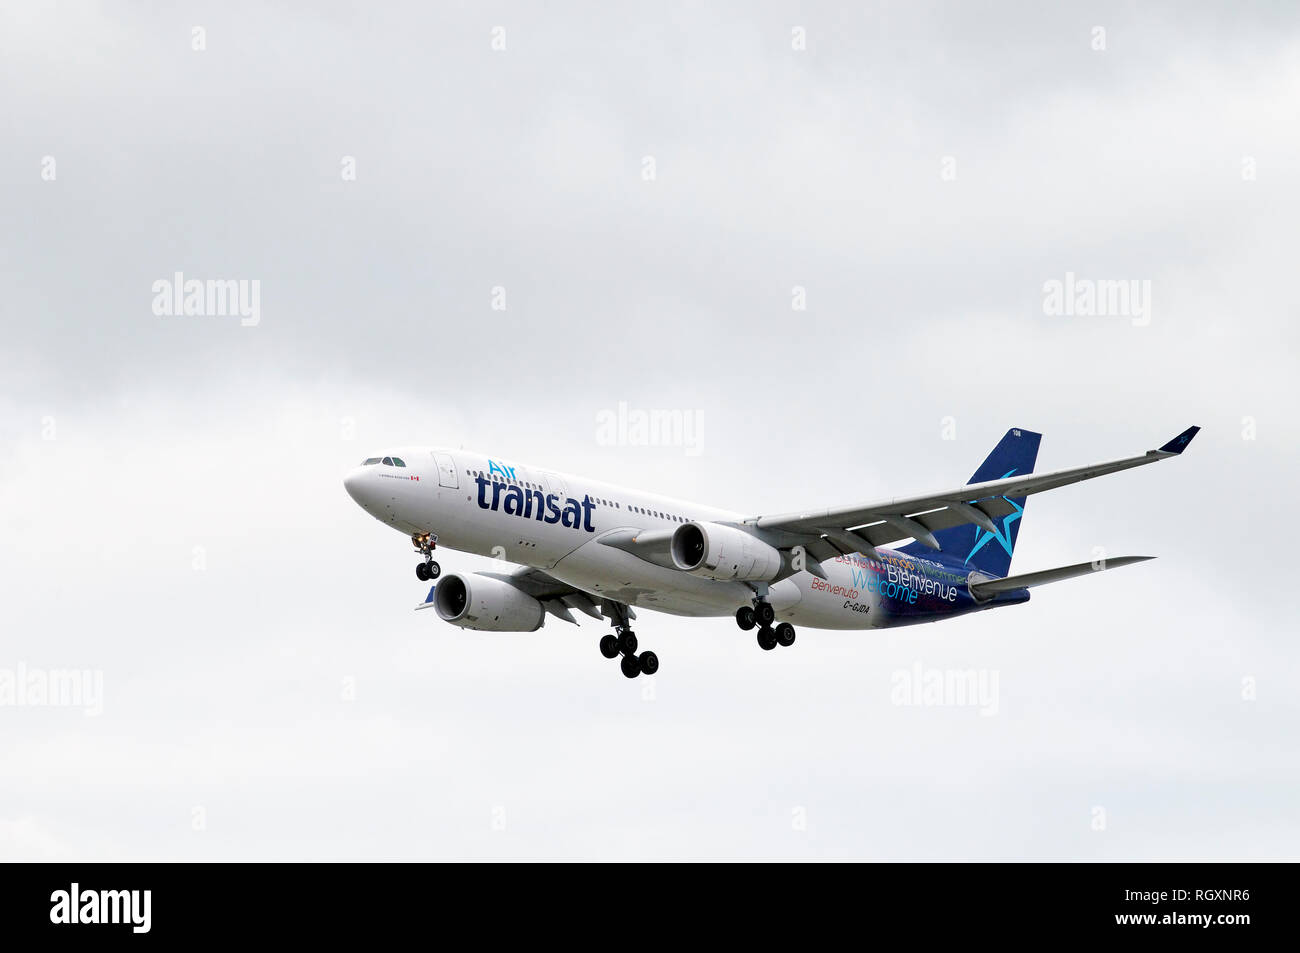 Air transat airplane coming into Vancouver International Airport landing wheels down ready for landing. Stock Photo